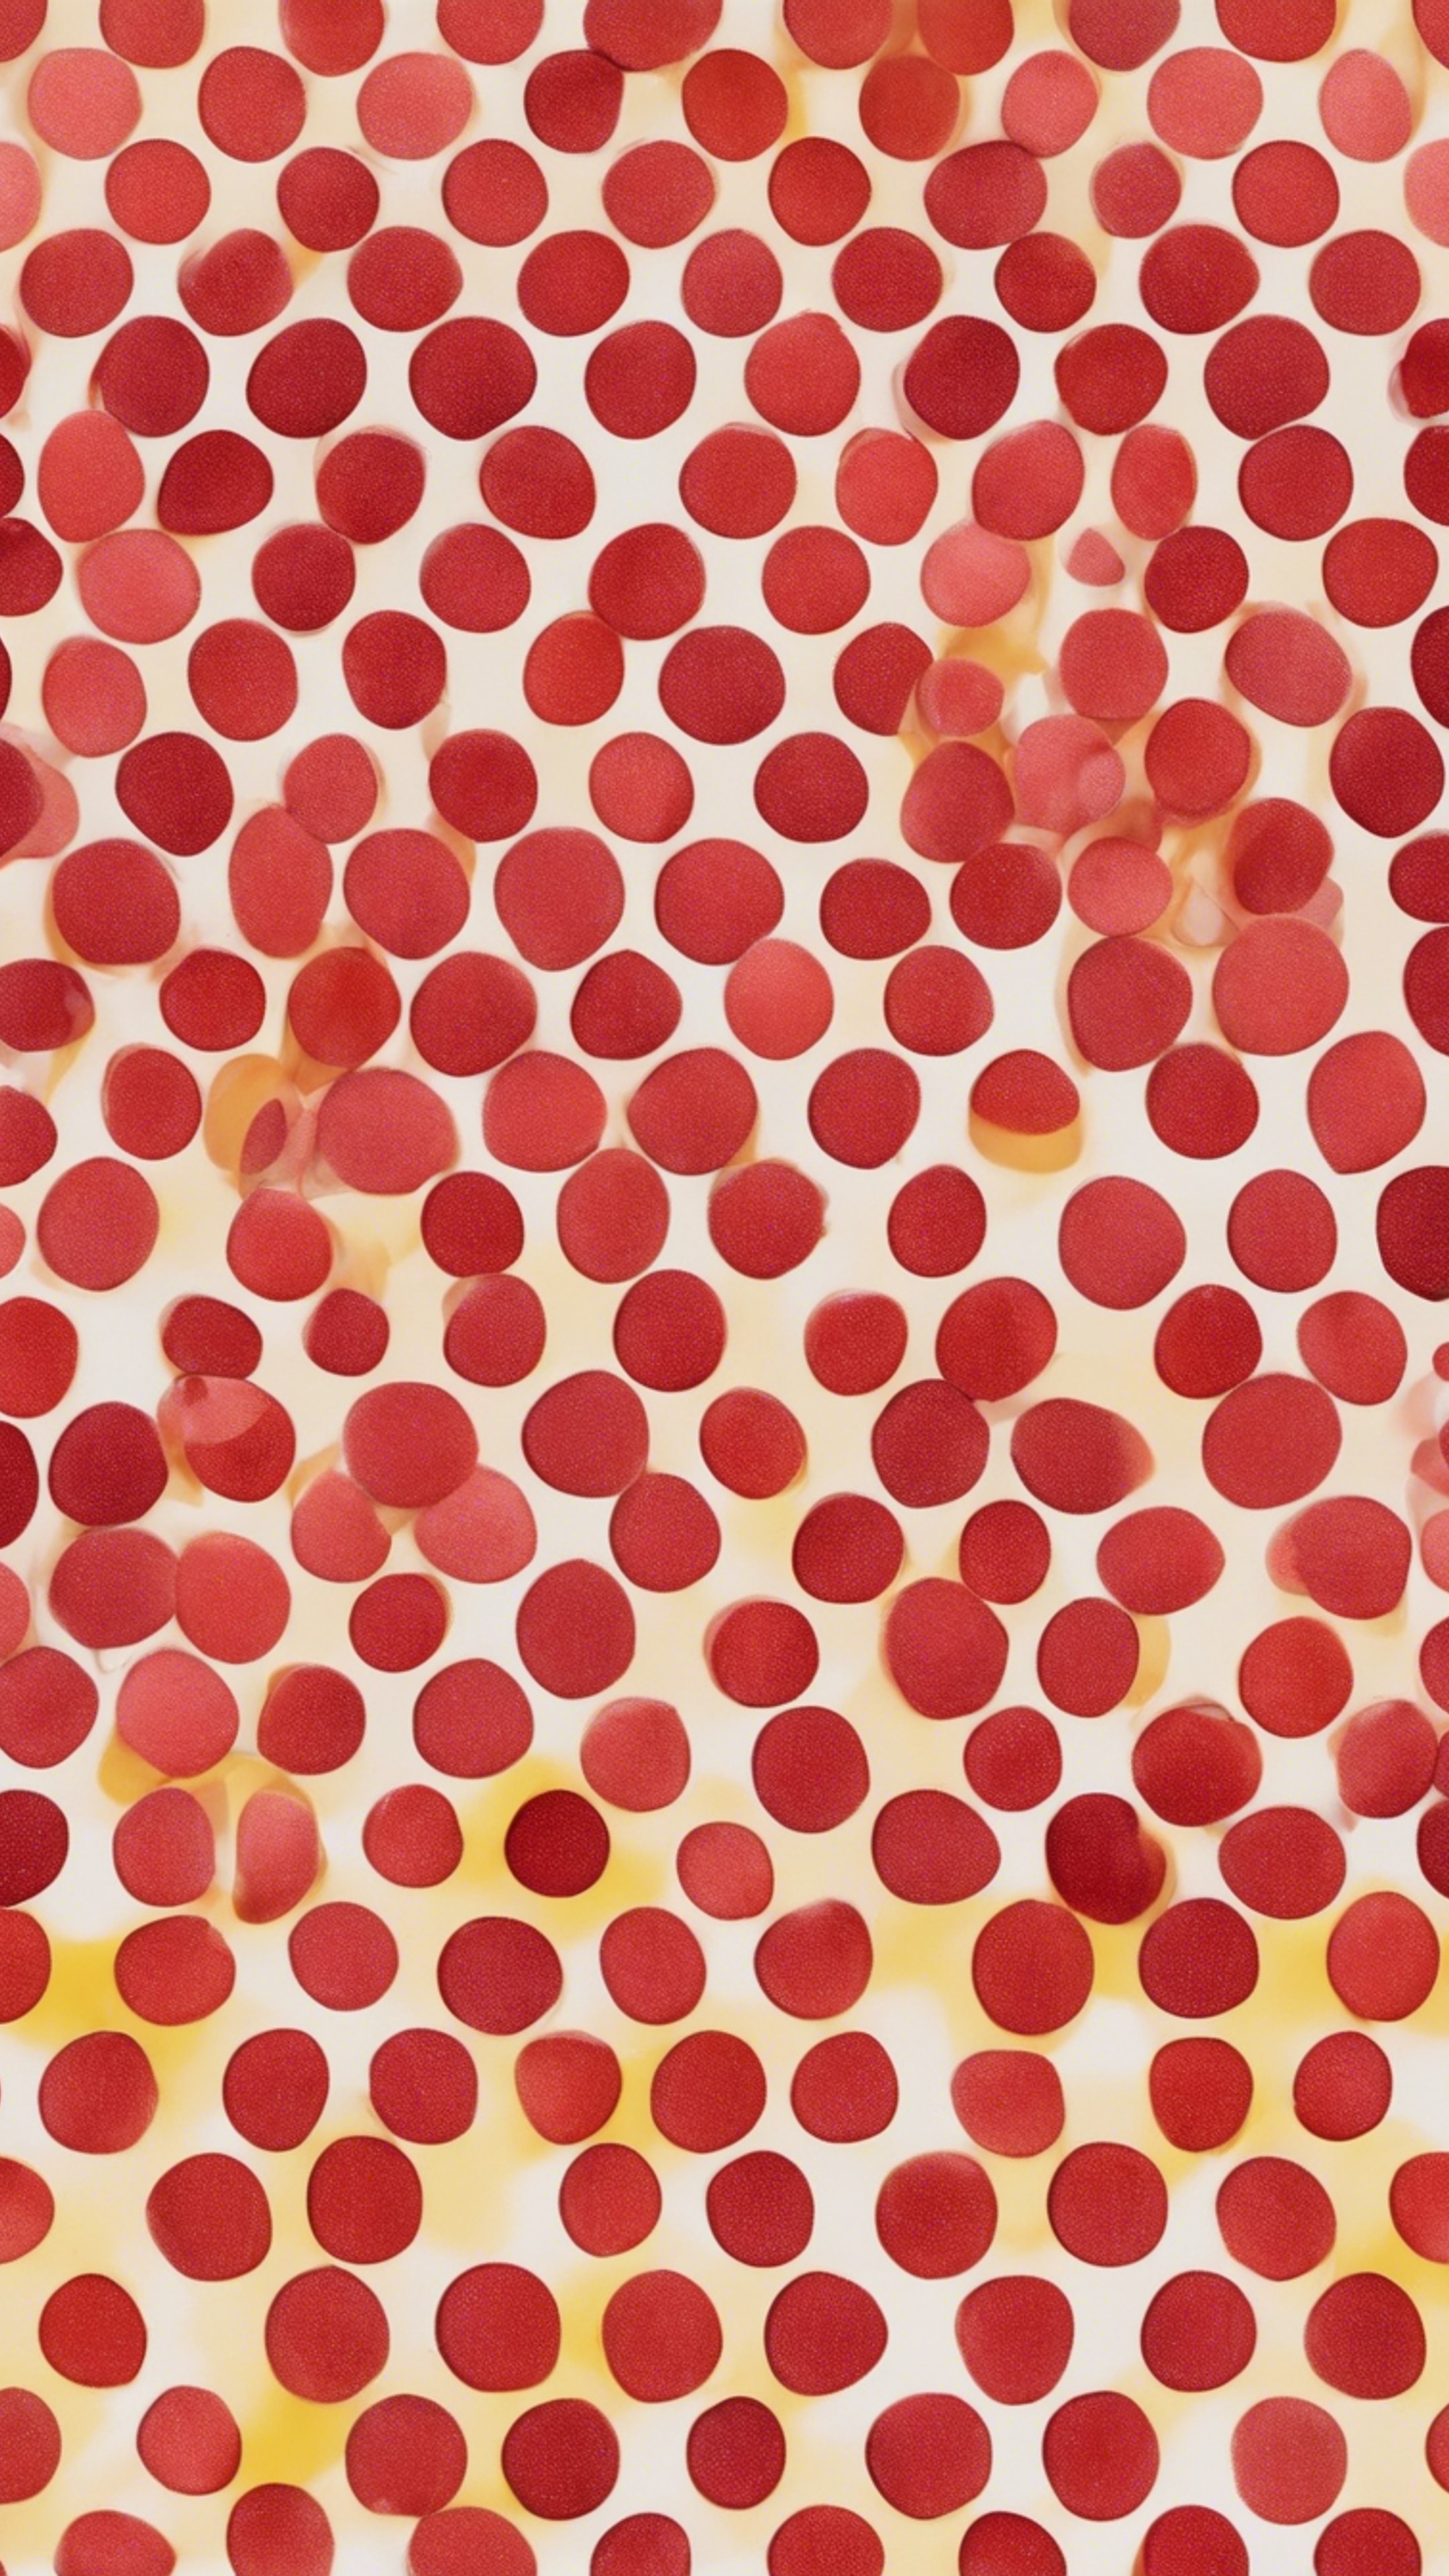 Red polka dots clashing beautifully with yellow ones, all over the seamless canvas. Tapeta[6845ea3f5aaf42daa07d]